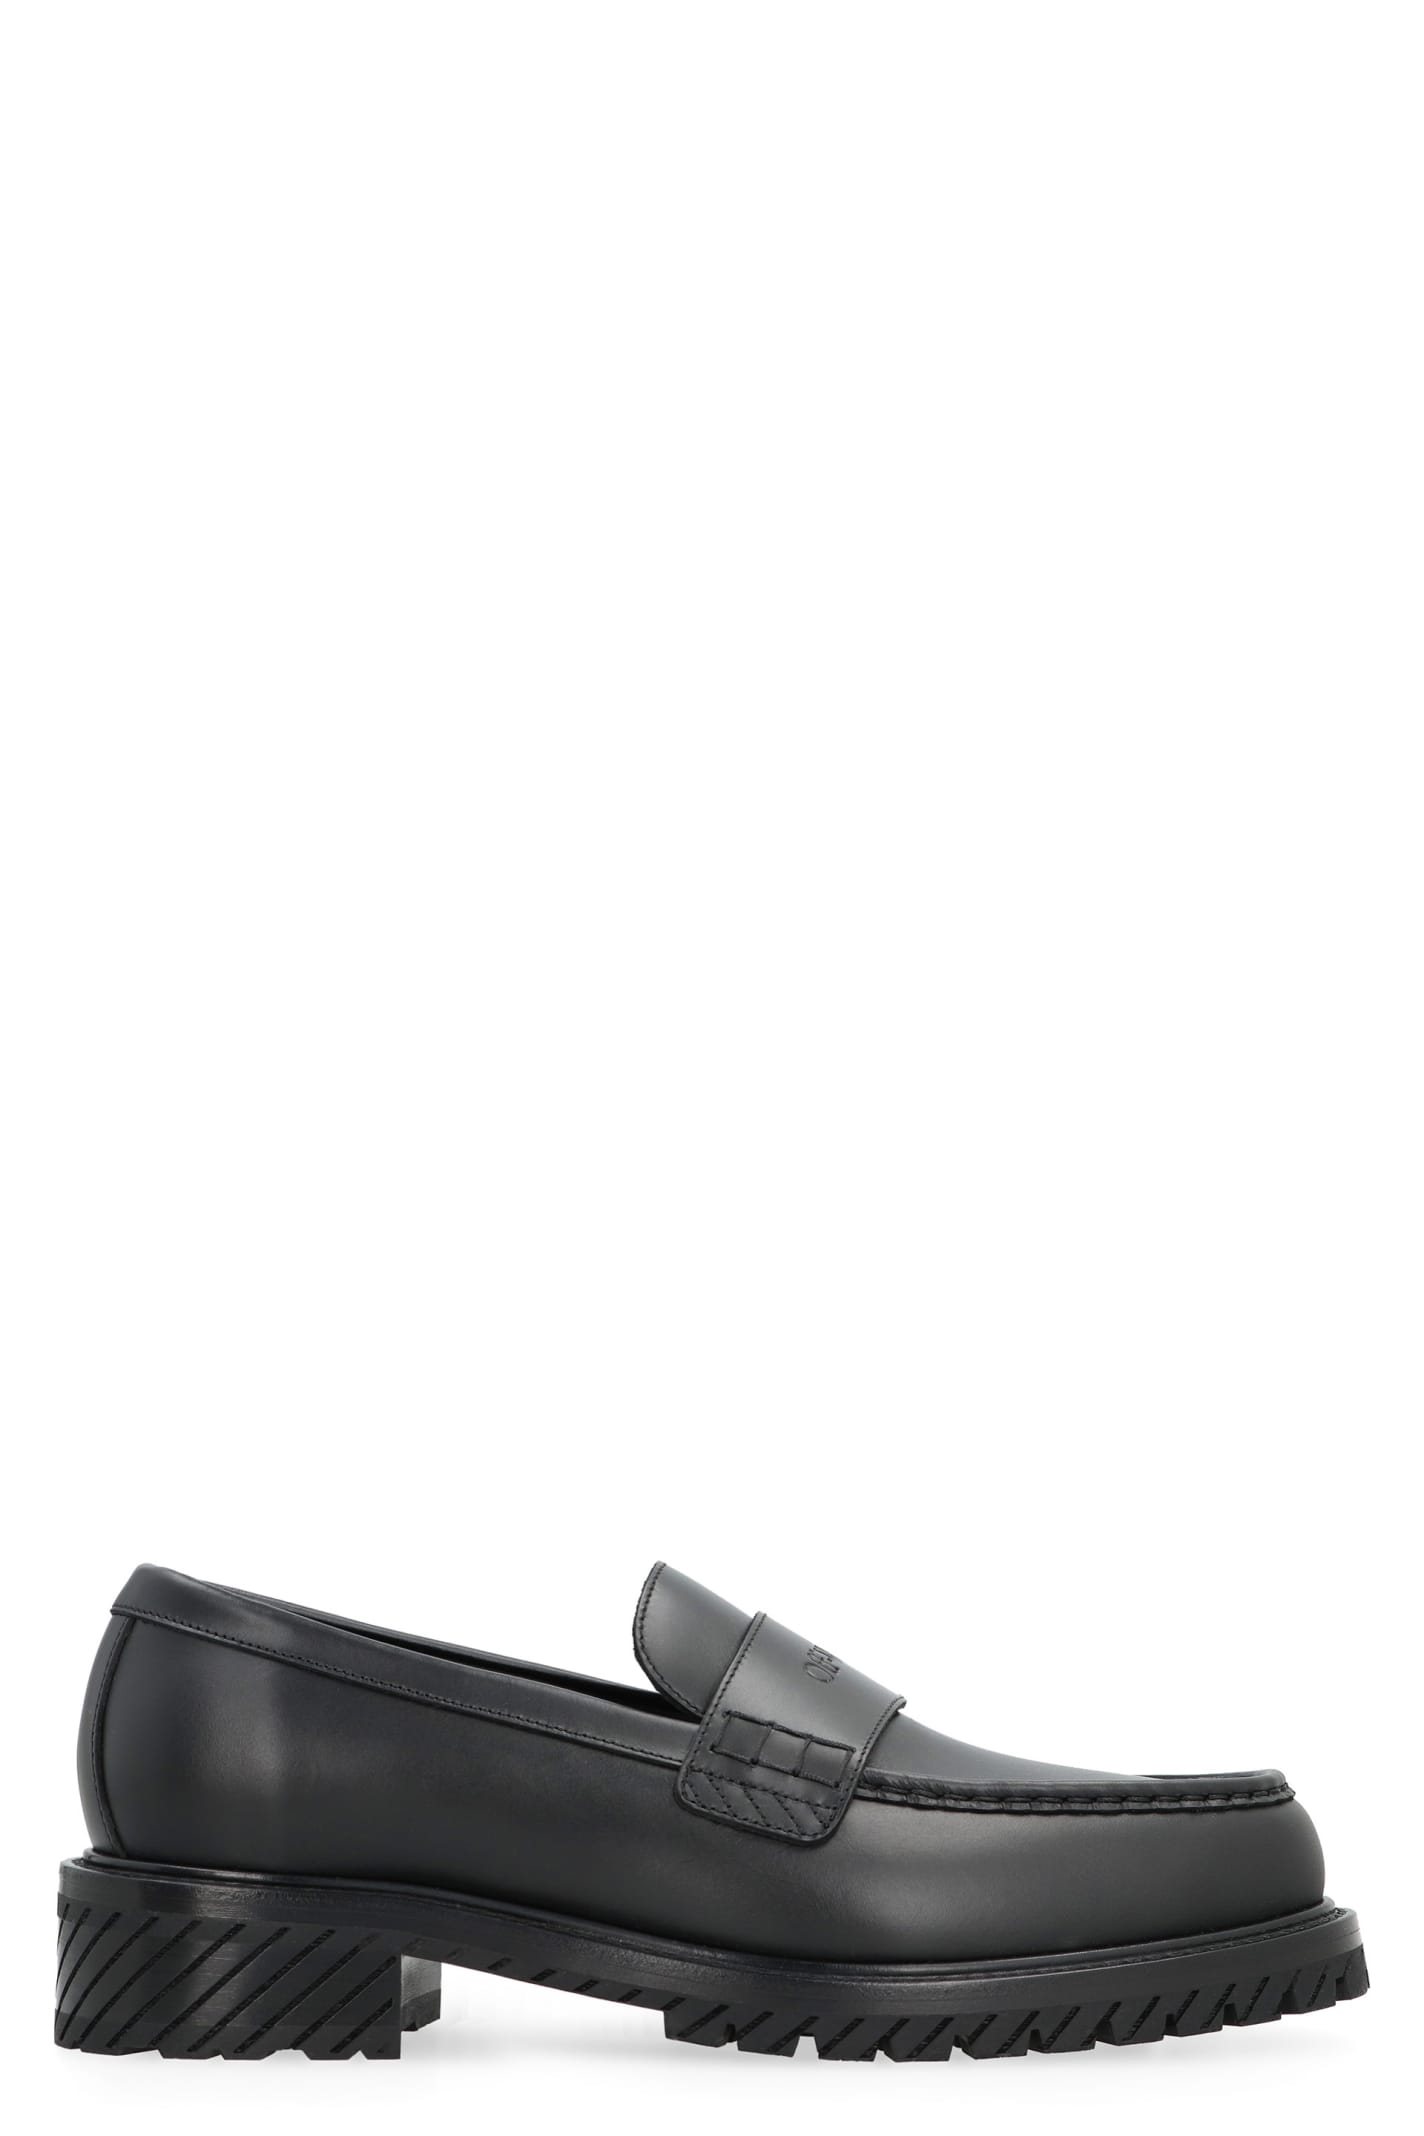 OFF-WHITE MILITARY LEATHER LOAFERS